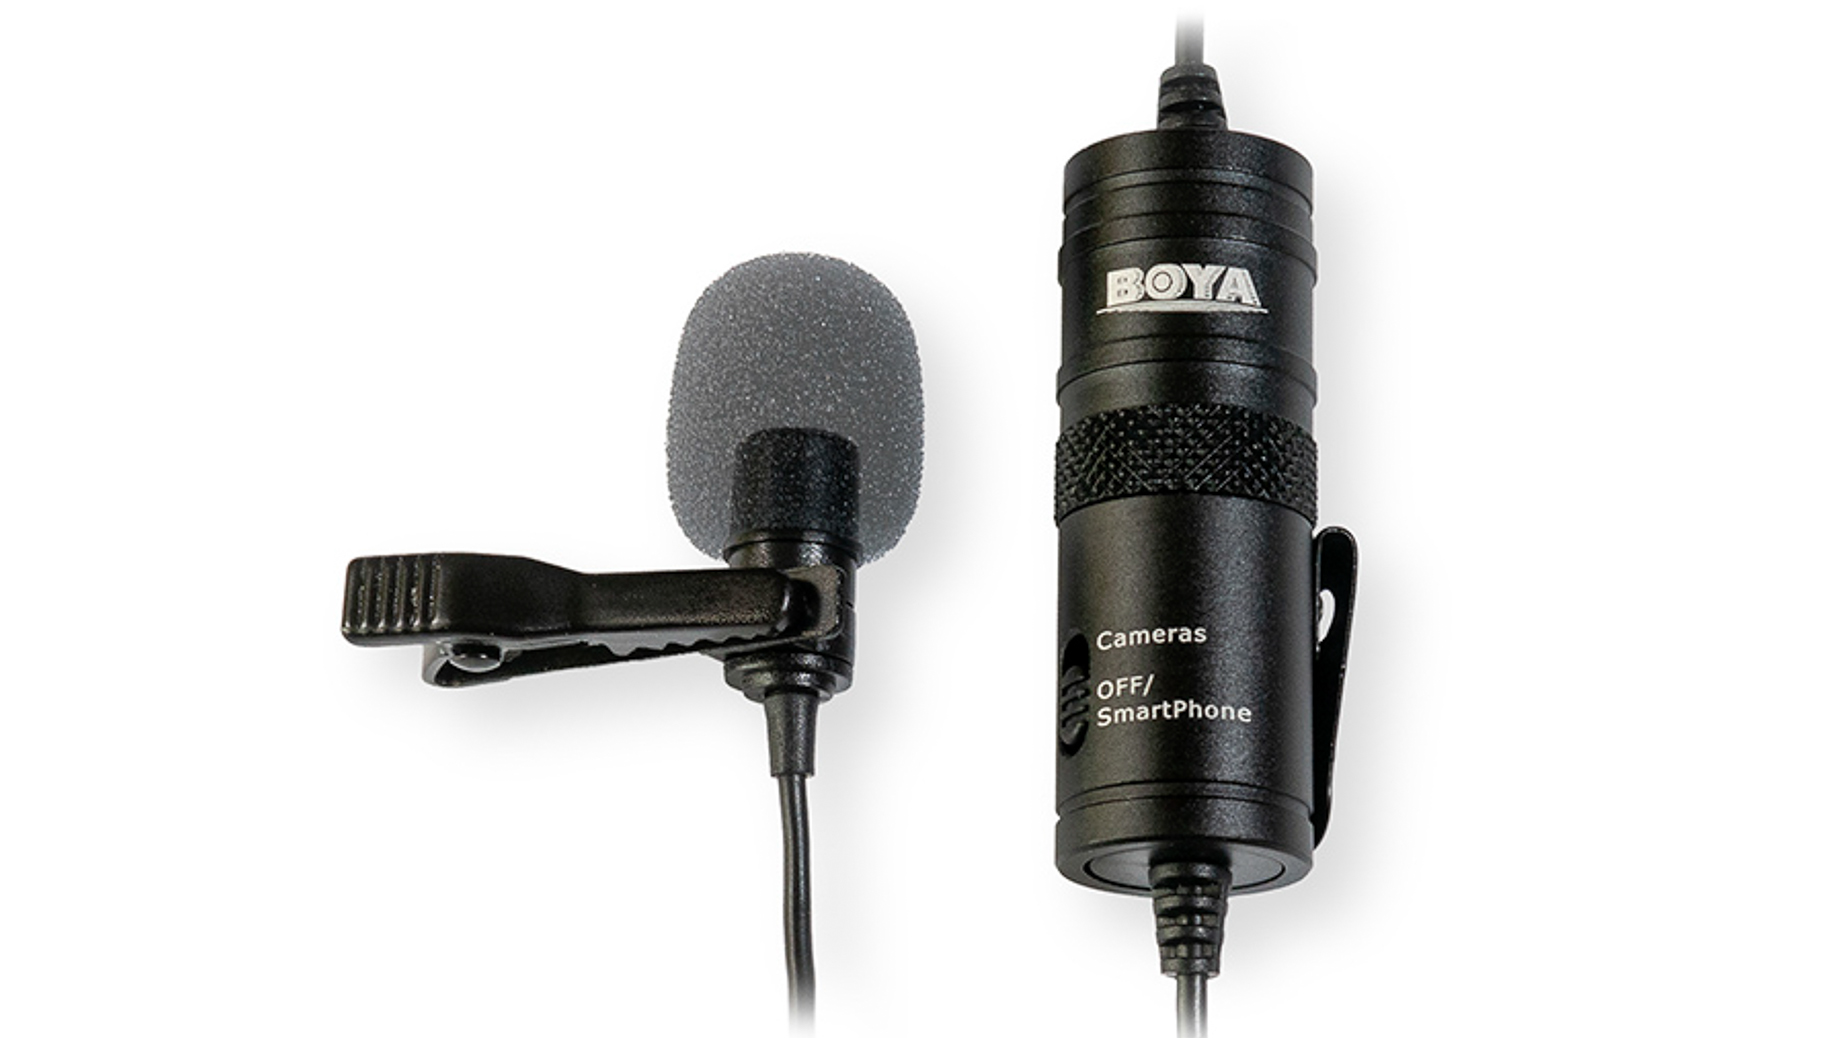  A small black microphone with a foam cover and a clip, designed to be used with cameras or smartphones for vlogging in different environments.